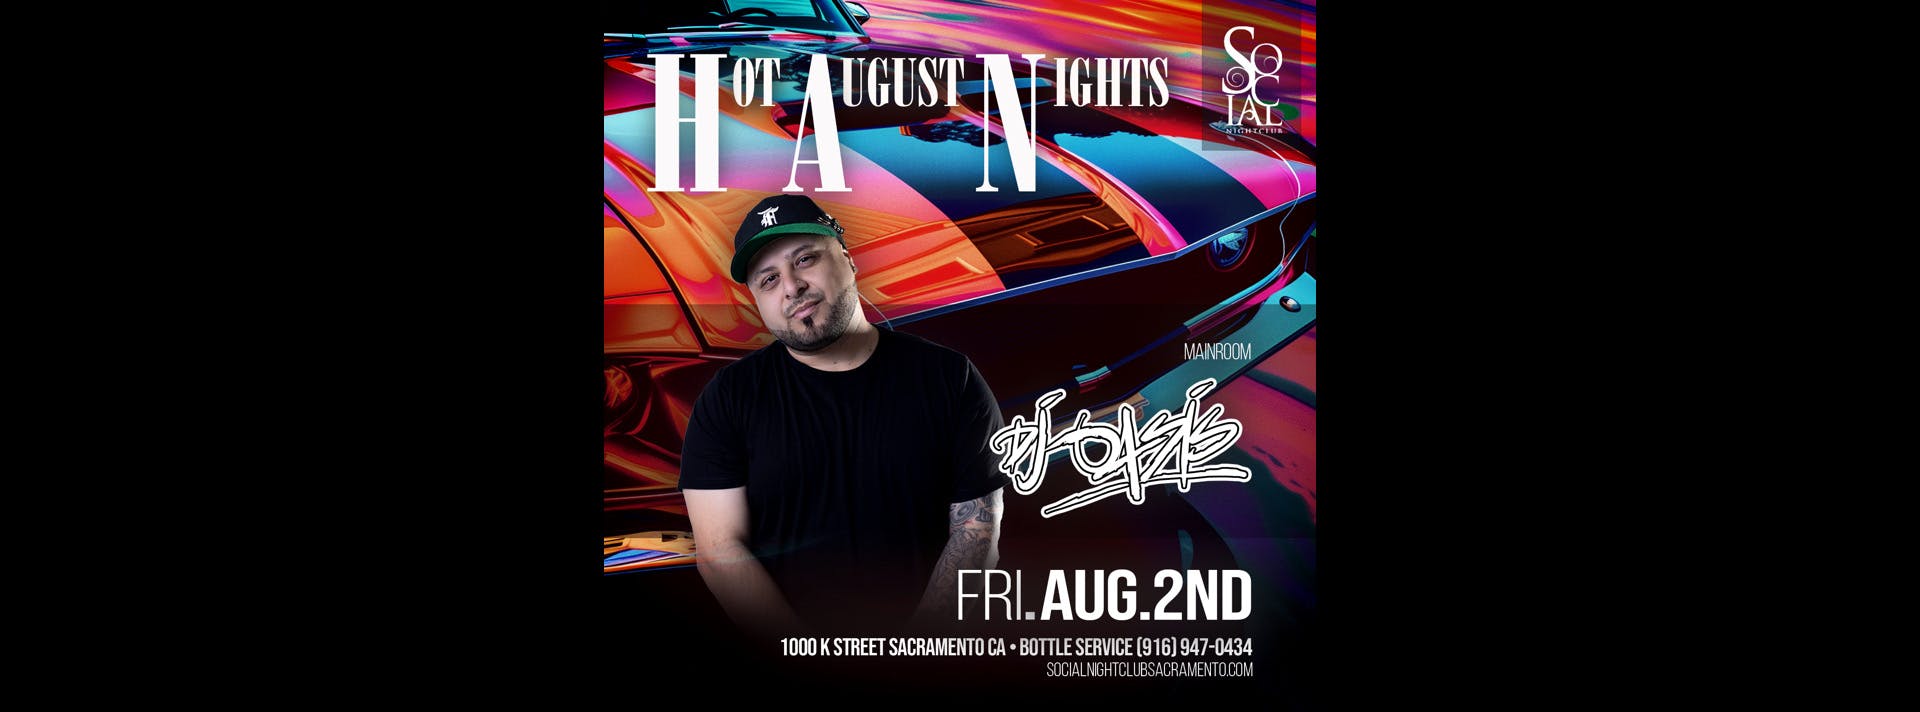 BeSocial Friday's Hot August Nights Edition ft. Dj Oasis